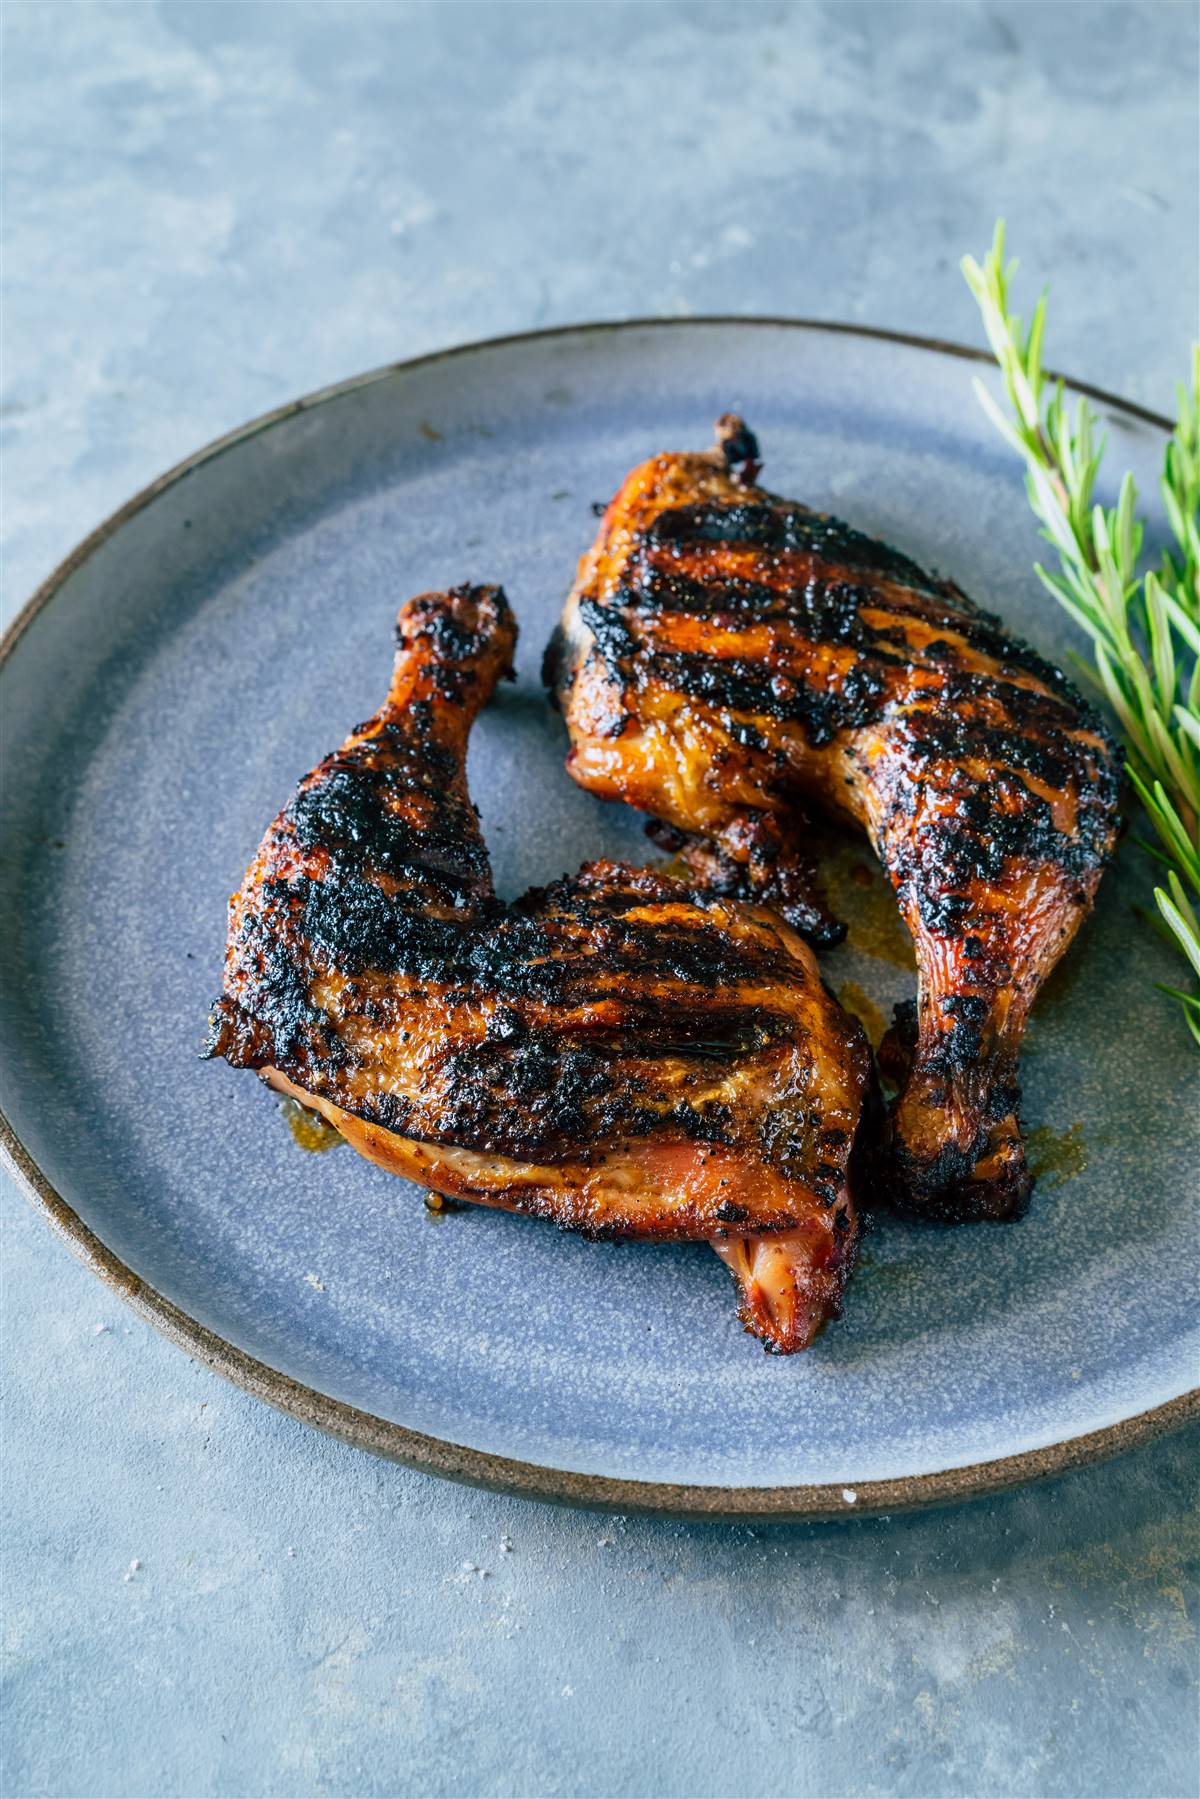 Barbecued chicken quarter